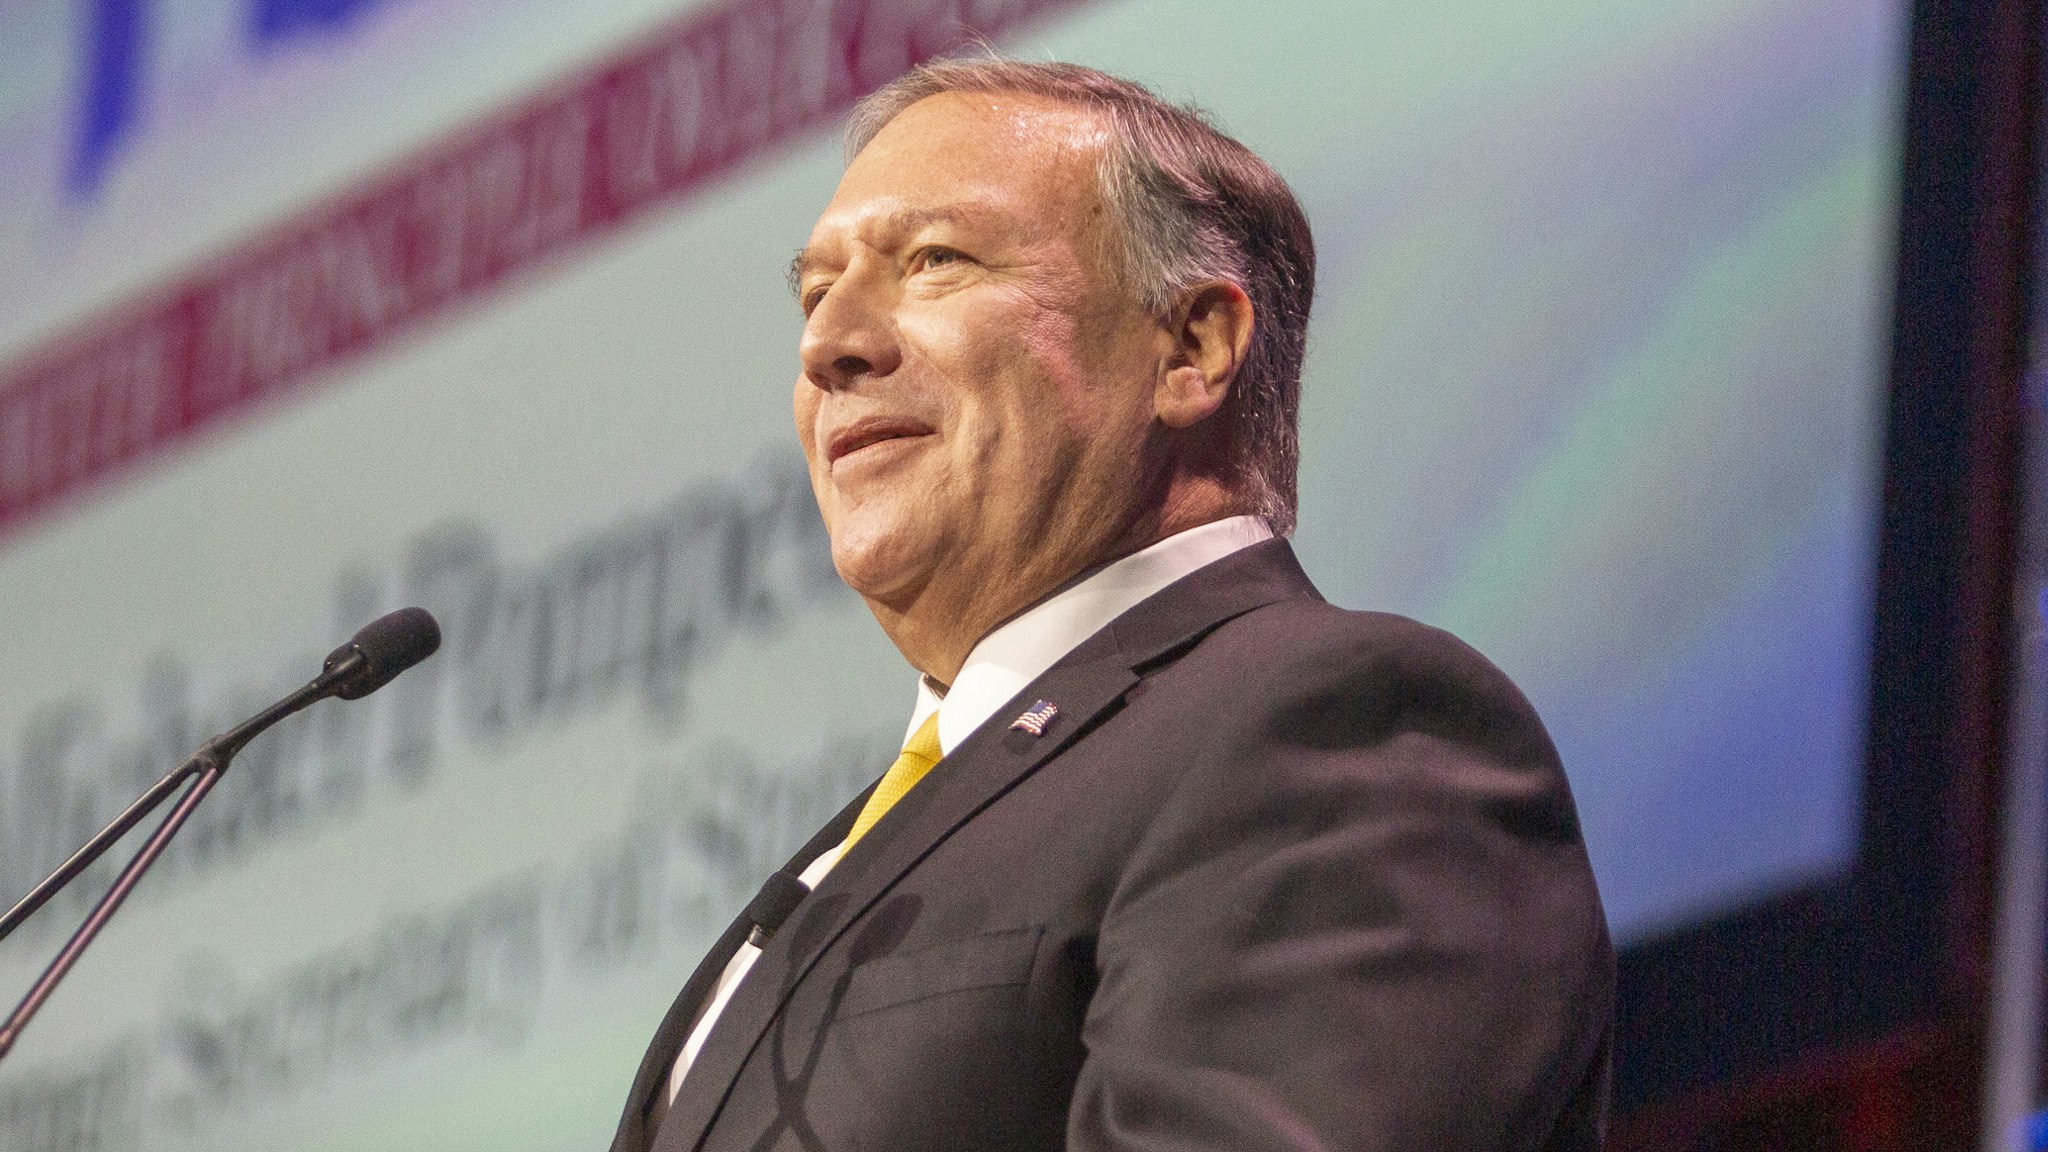 Michael Pompeo, former U.S. secretary of state, speaks during the FAMiLY Leader summit in Des Moines, Iowa, U.S., on Friday, July 16, 2021. Former Vice President Mike Pence is headlining the evangelical group's 10th annual leadership summit.